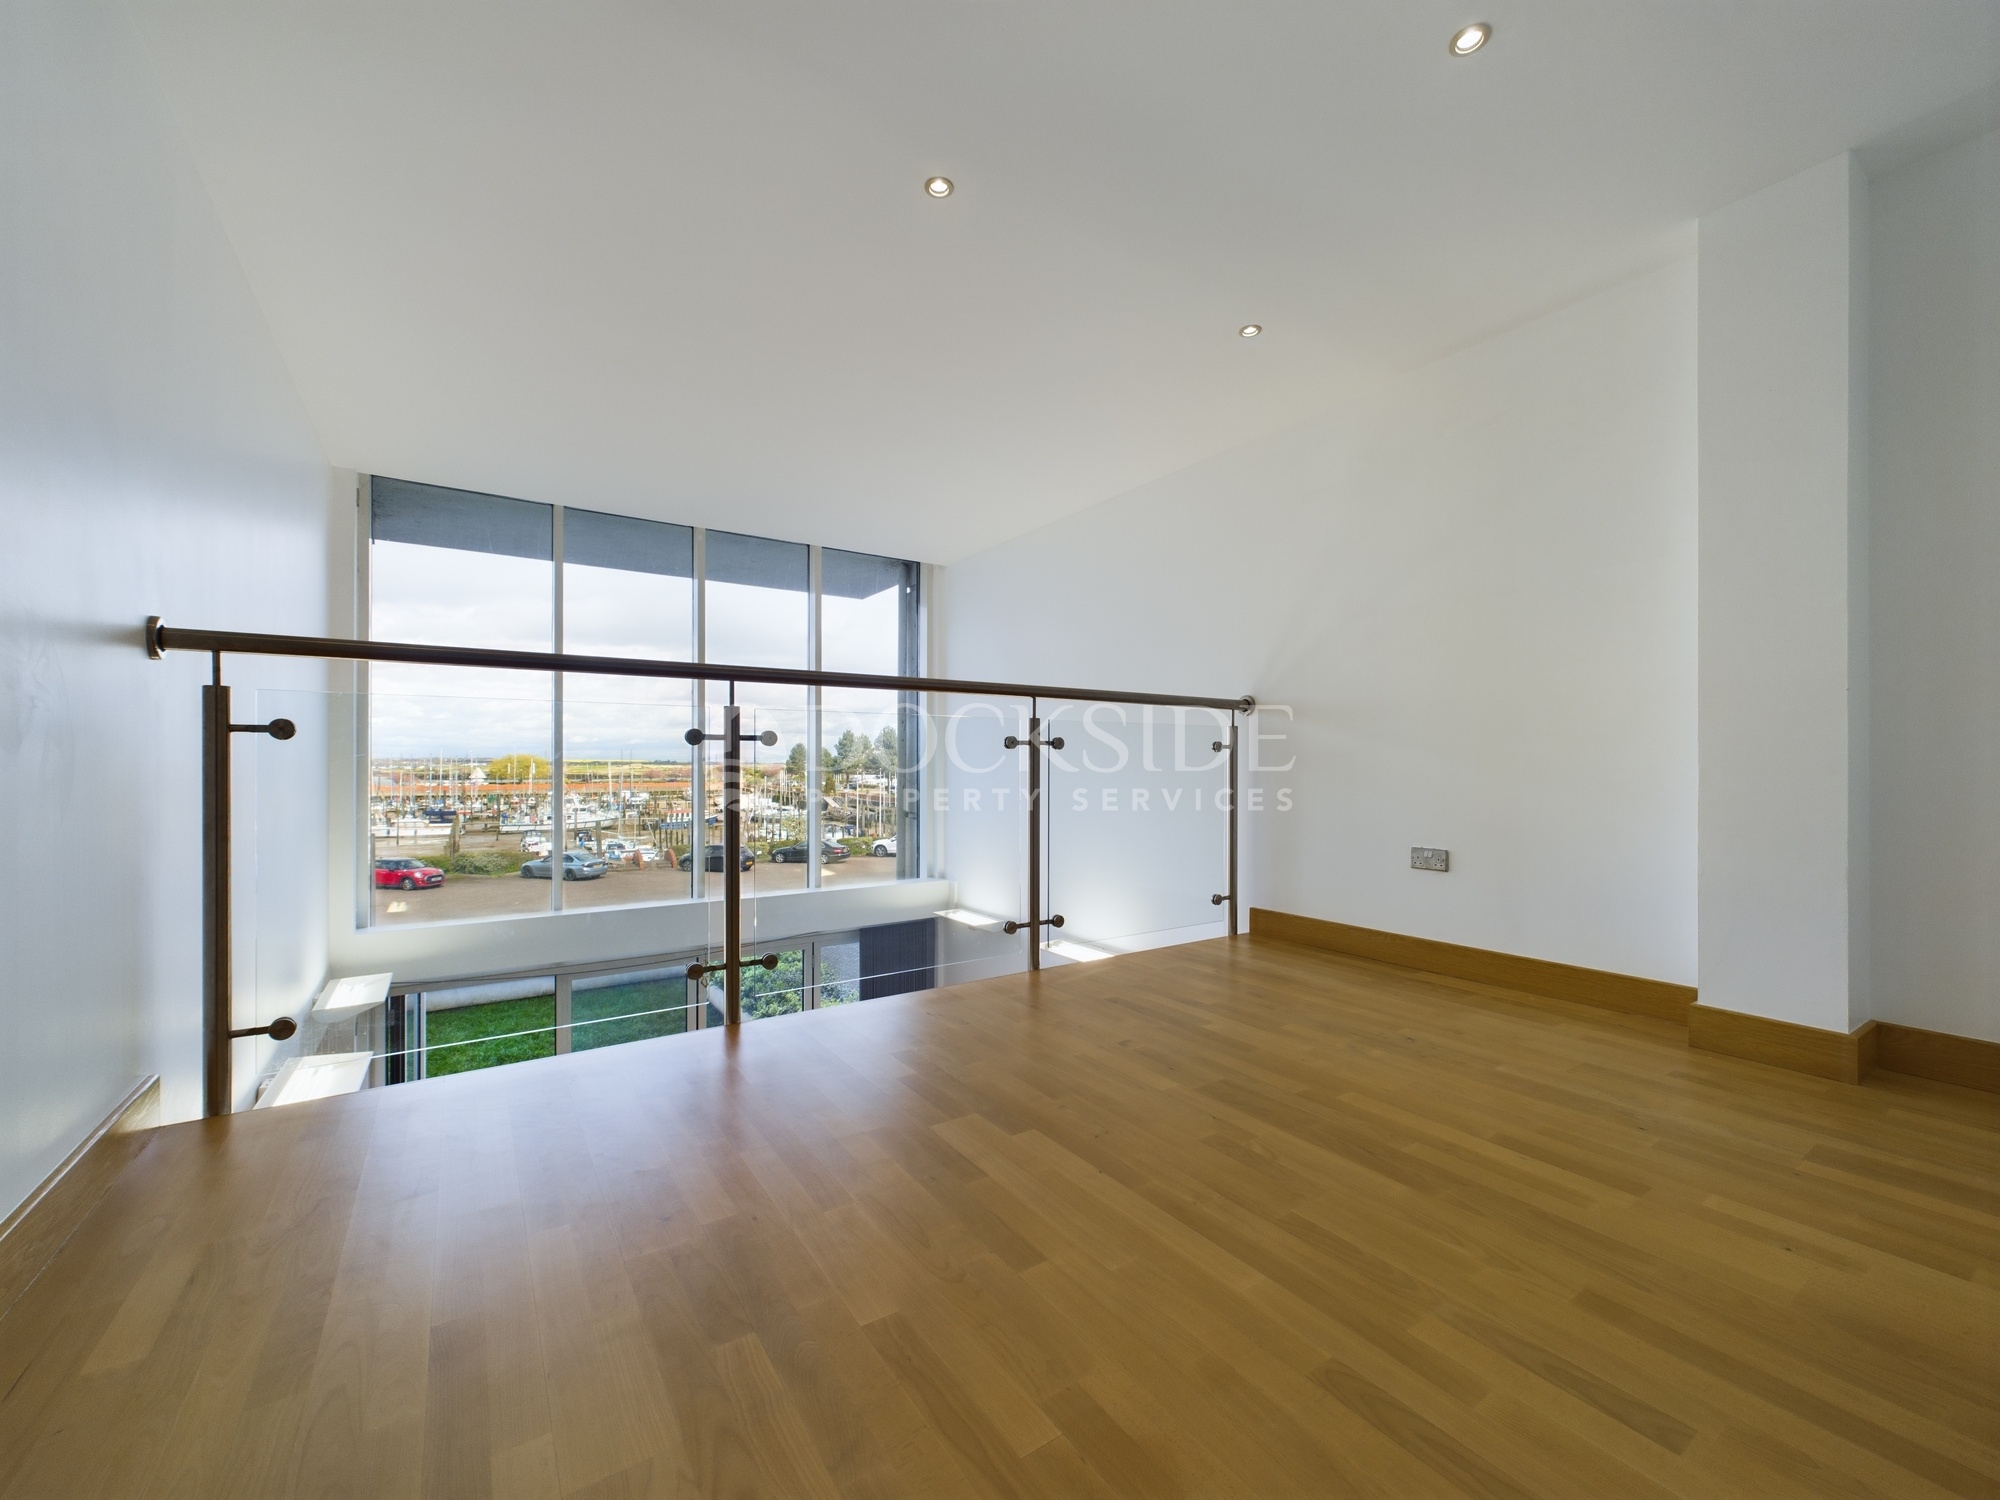 5 bed to rent in Pier Road, Gillingham  - Property Image 10